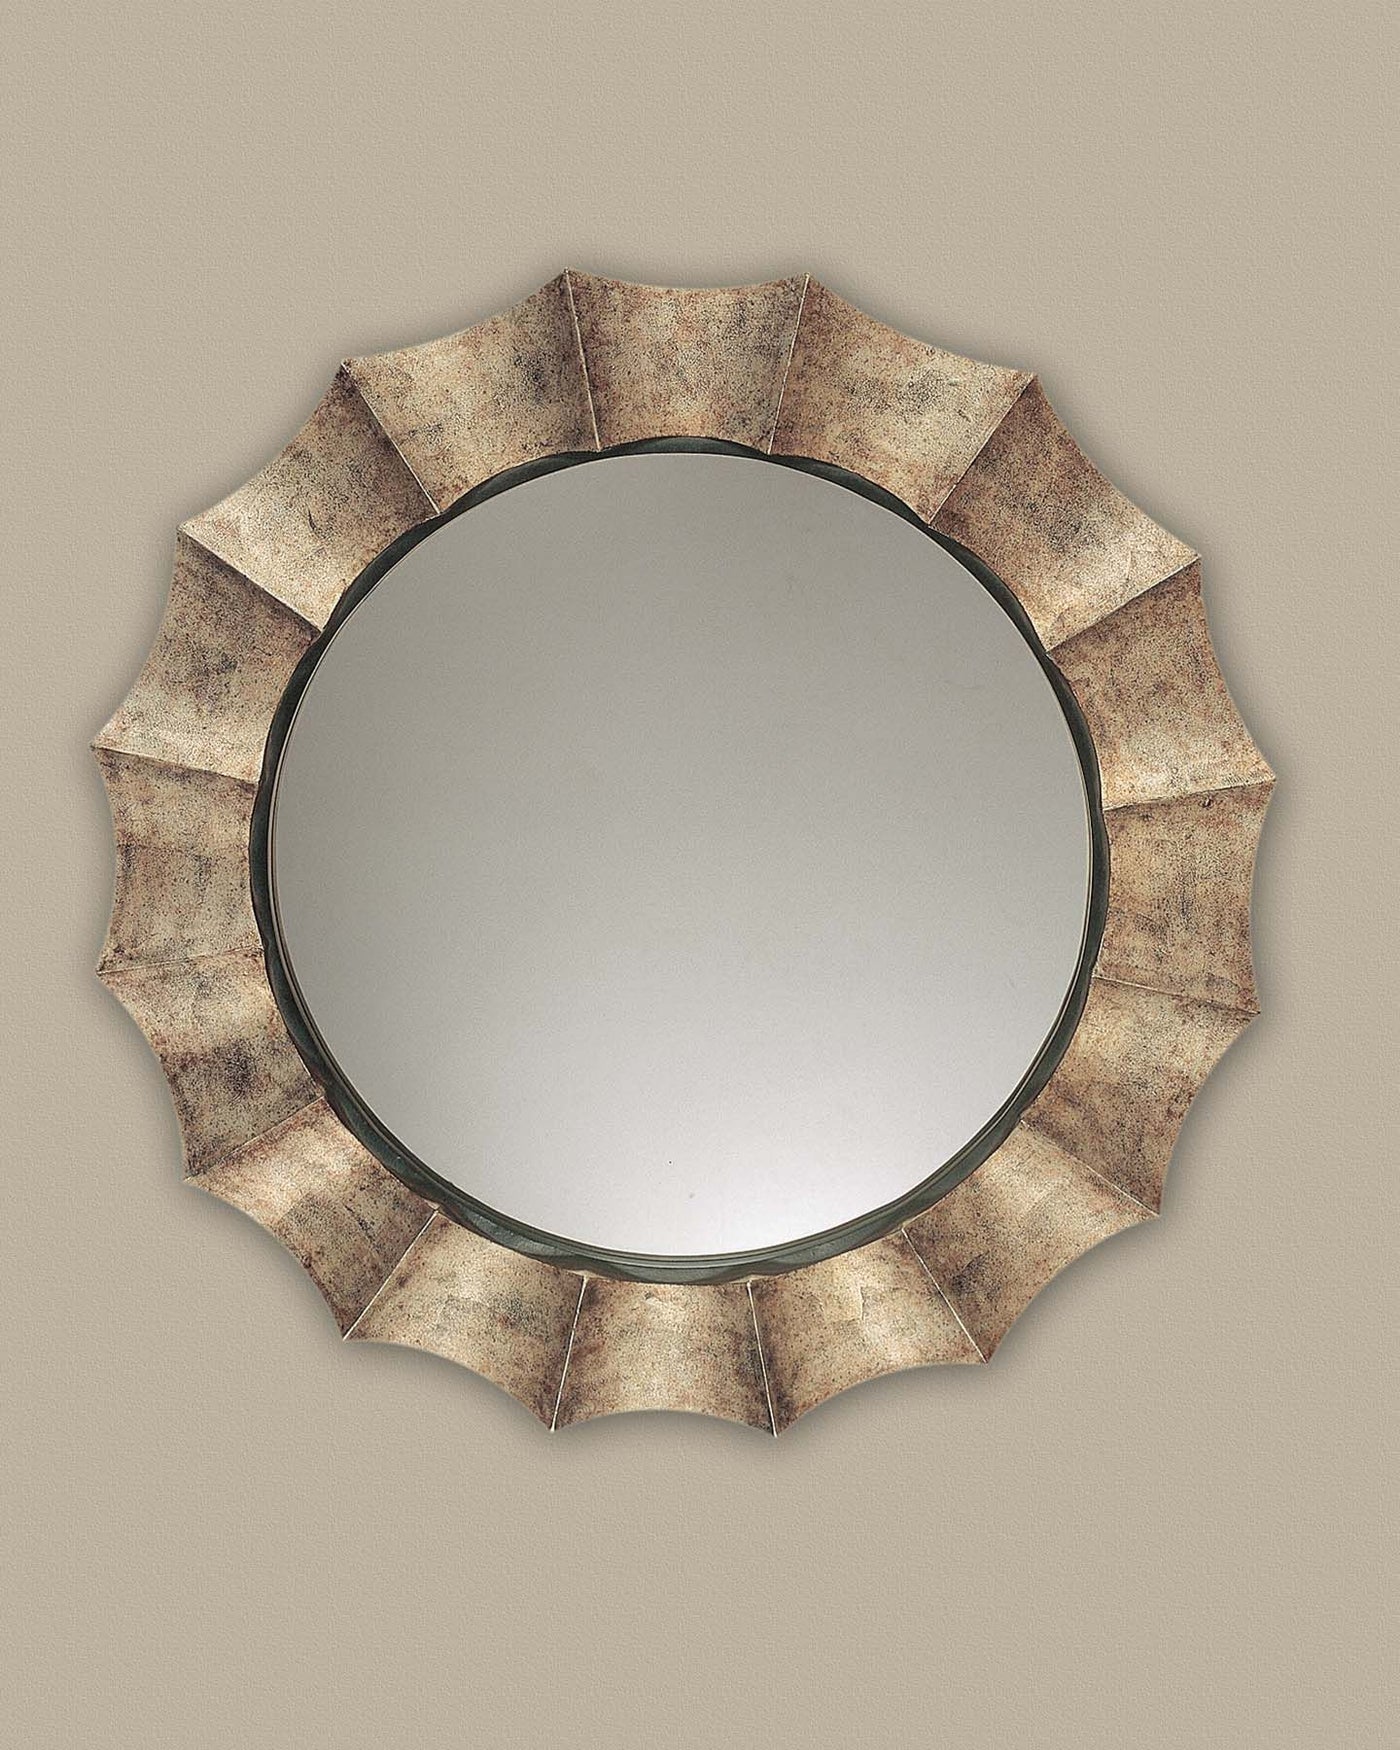 Unique Frame Features An Antique Silver Leaf Finish With Warm Highlights Which Resembles A Burnished Champagne Finish. The...